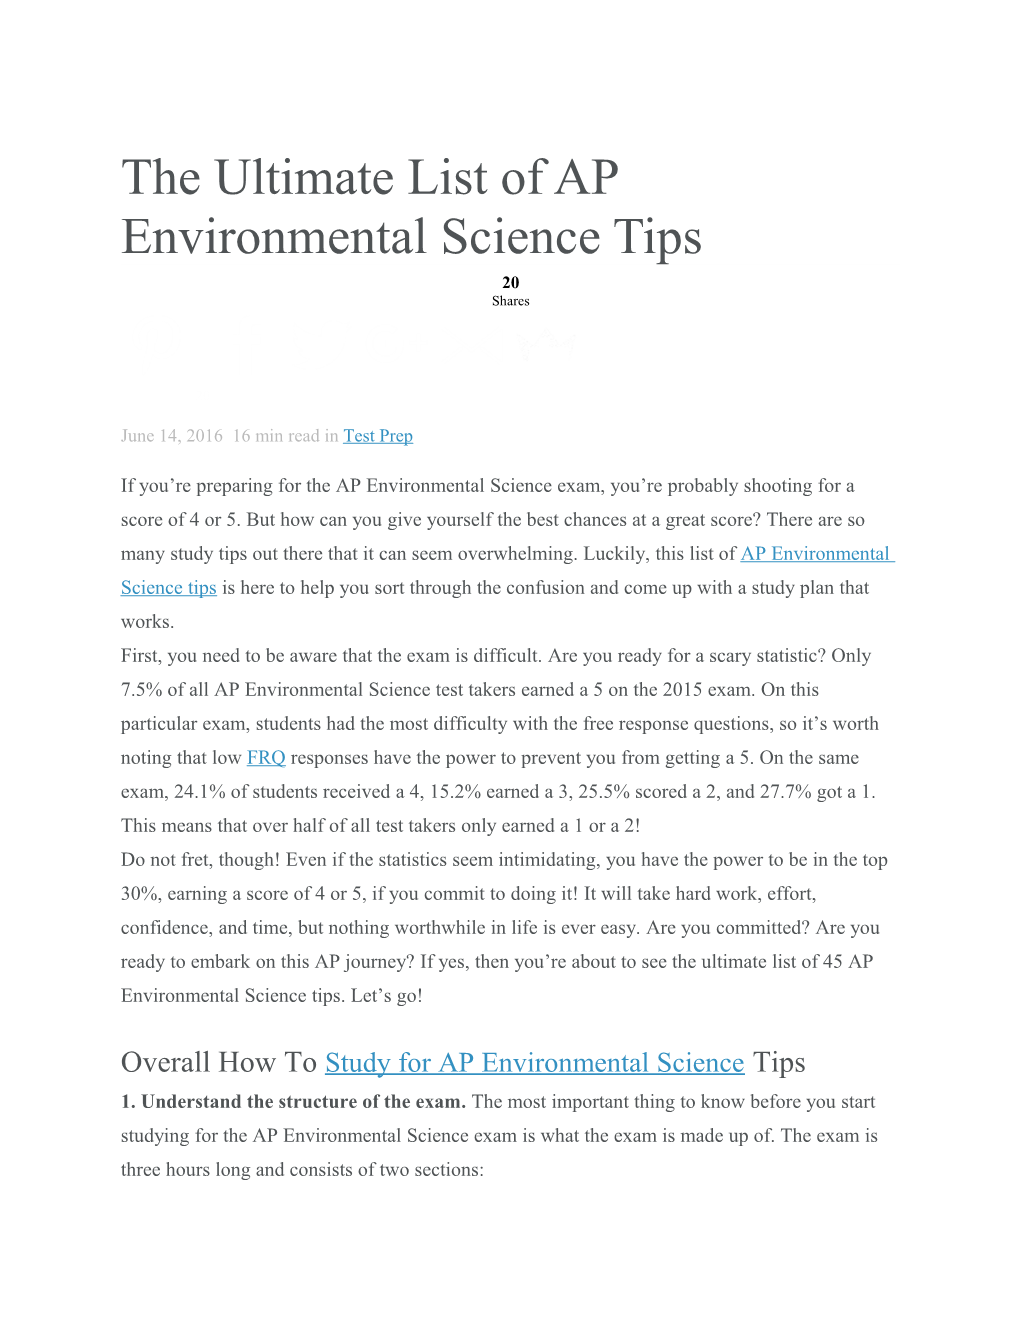 The Ultimate List of AP Environmental Science Tips